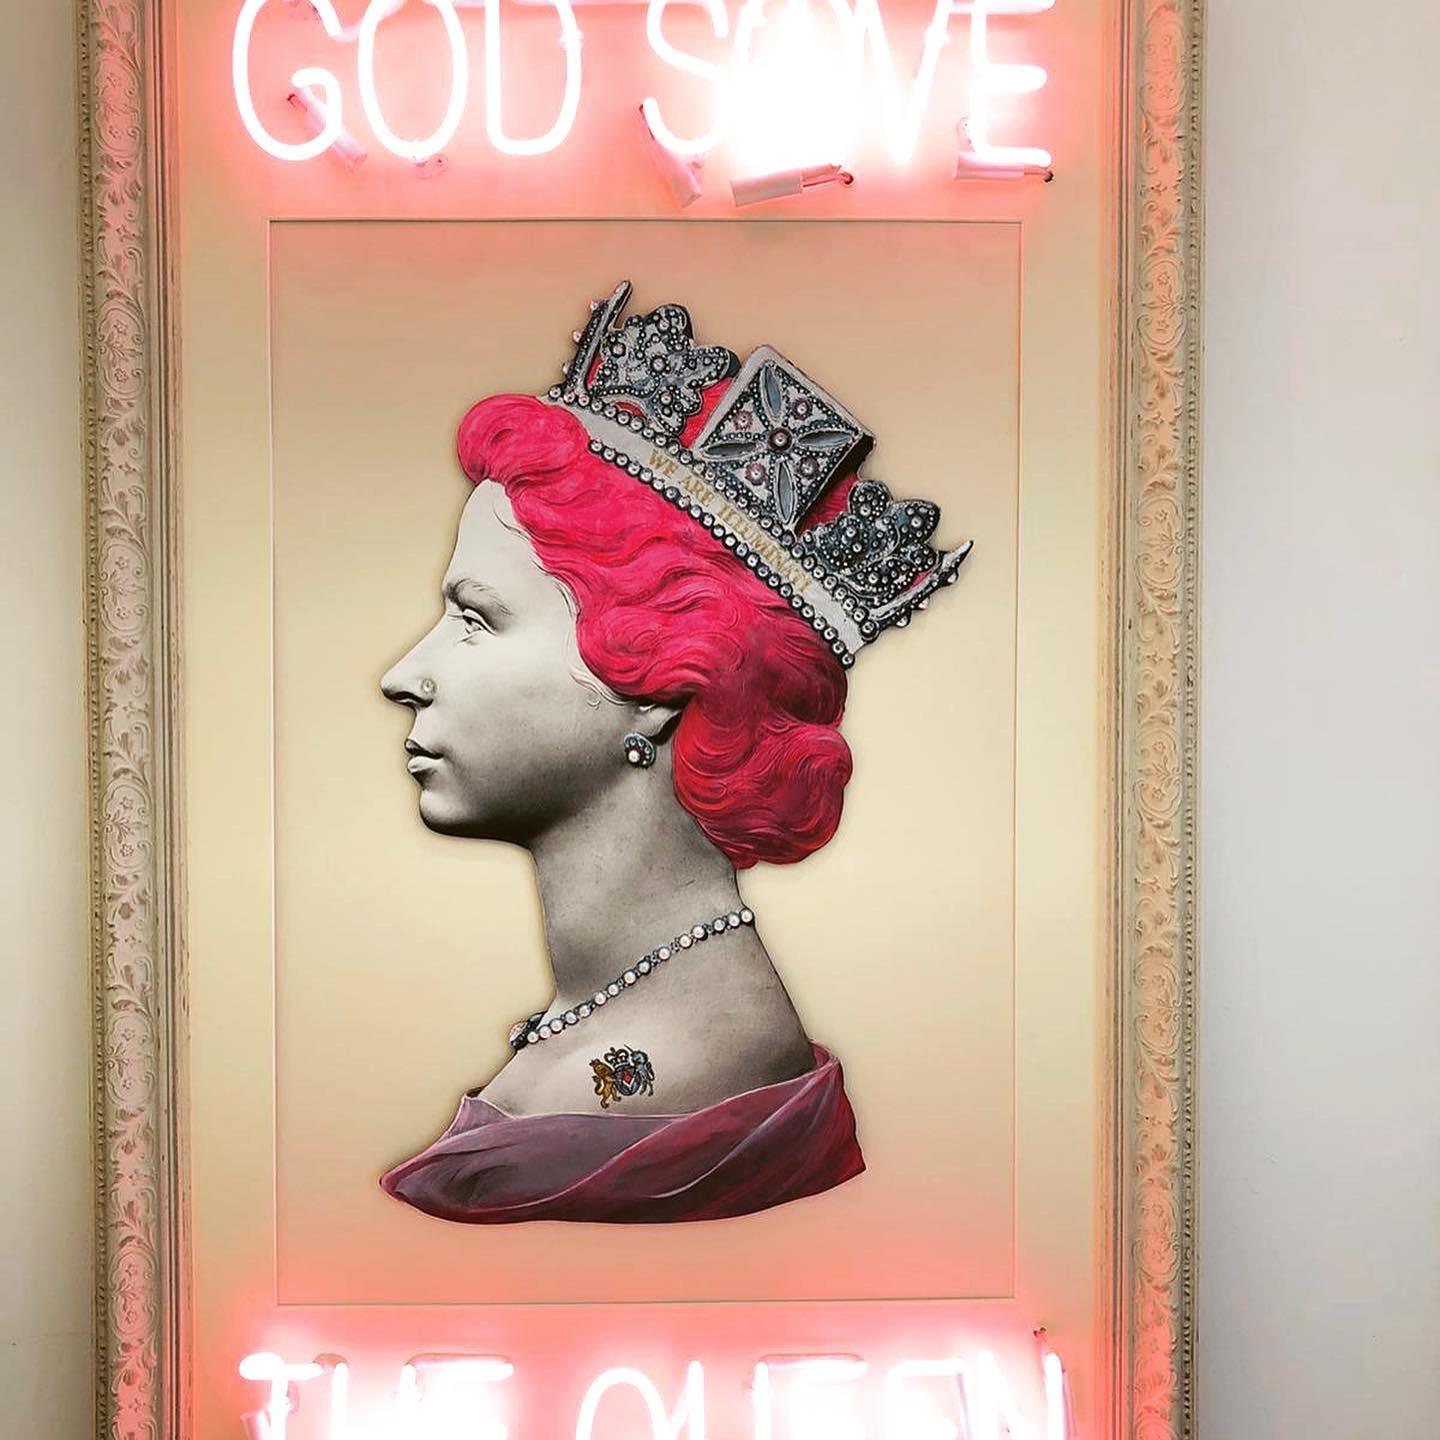 God Save the Queen neon original signed 